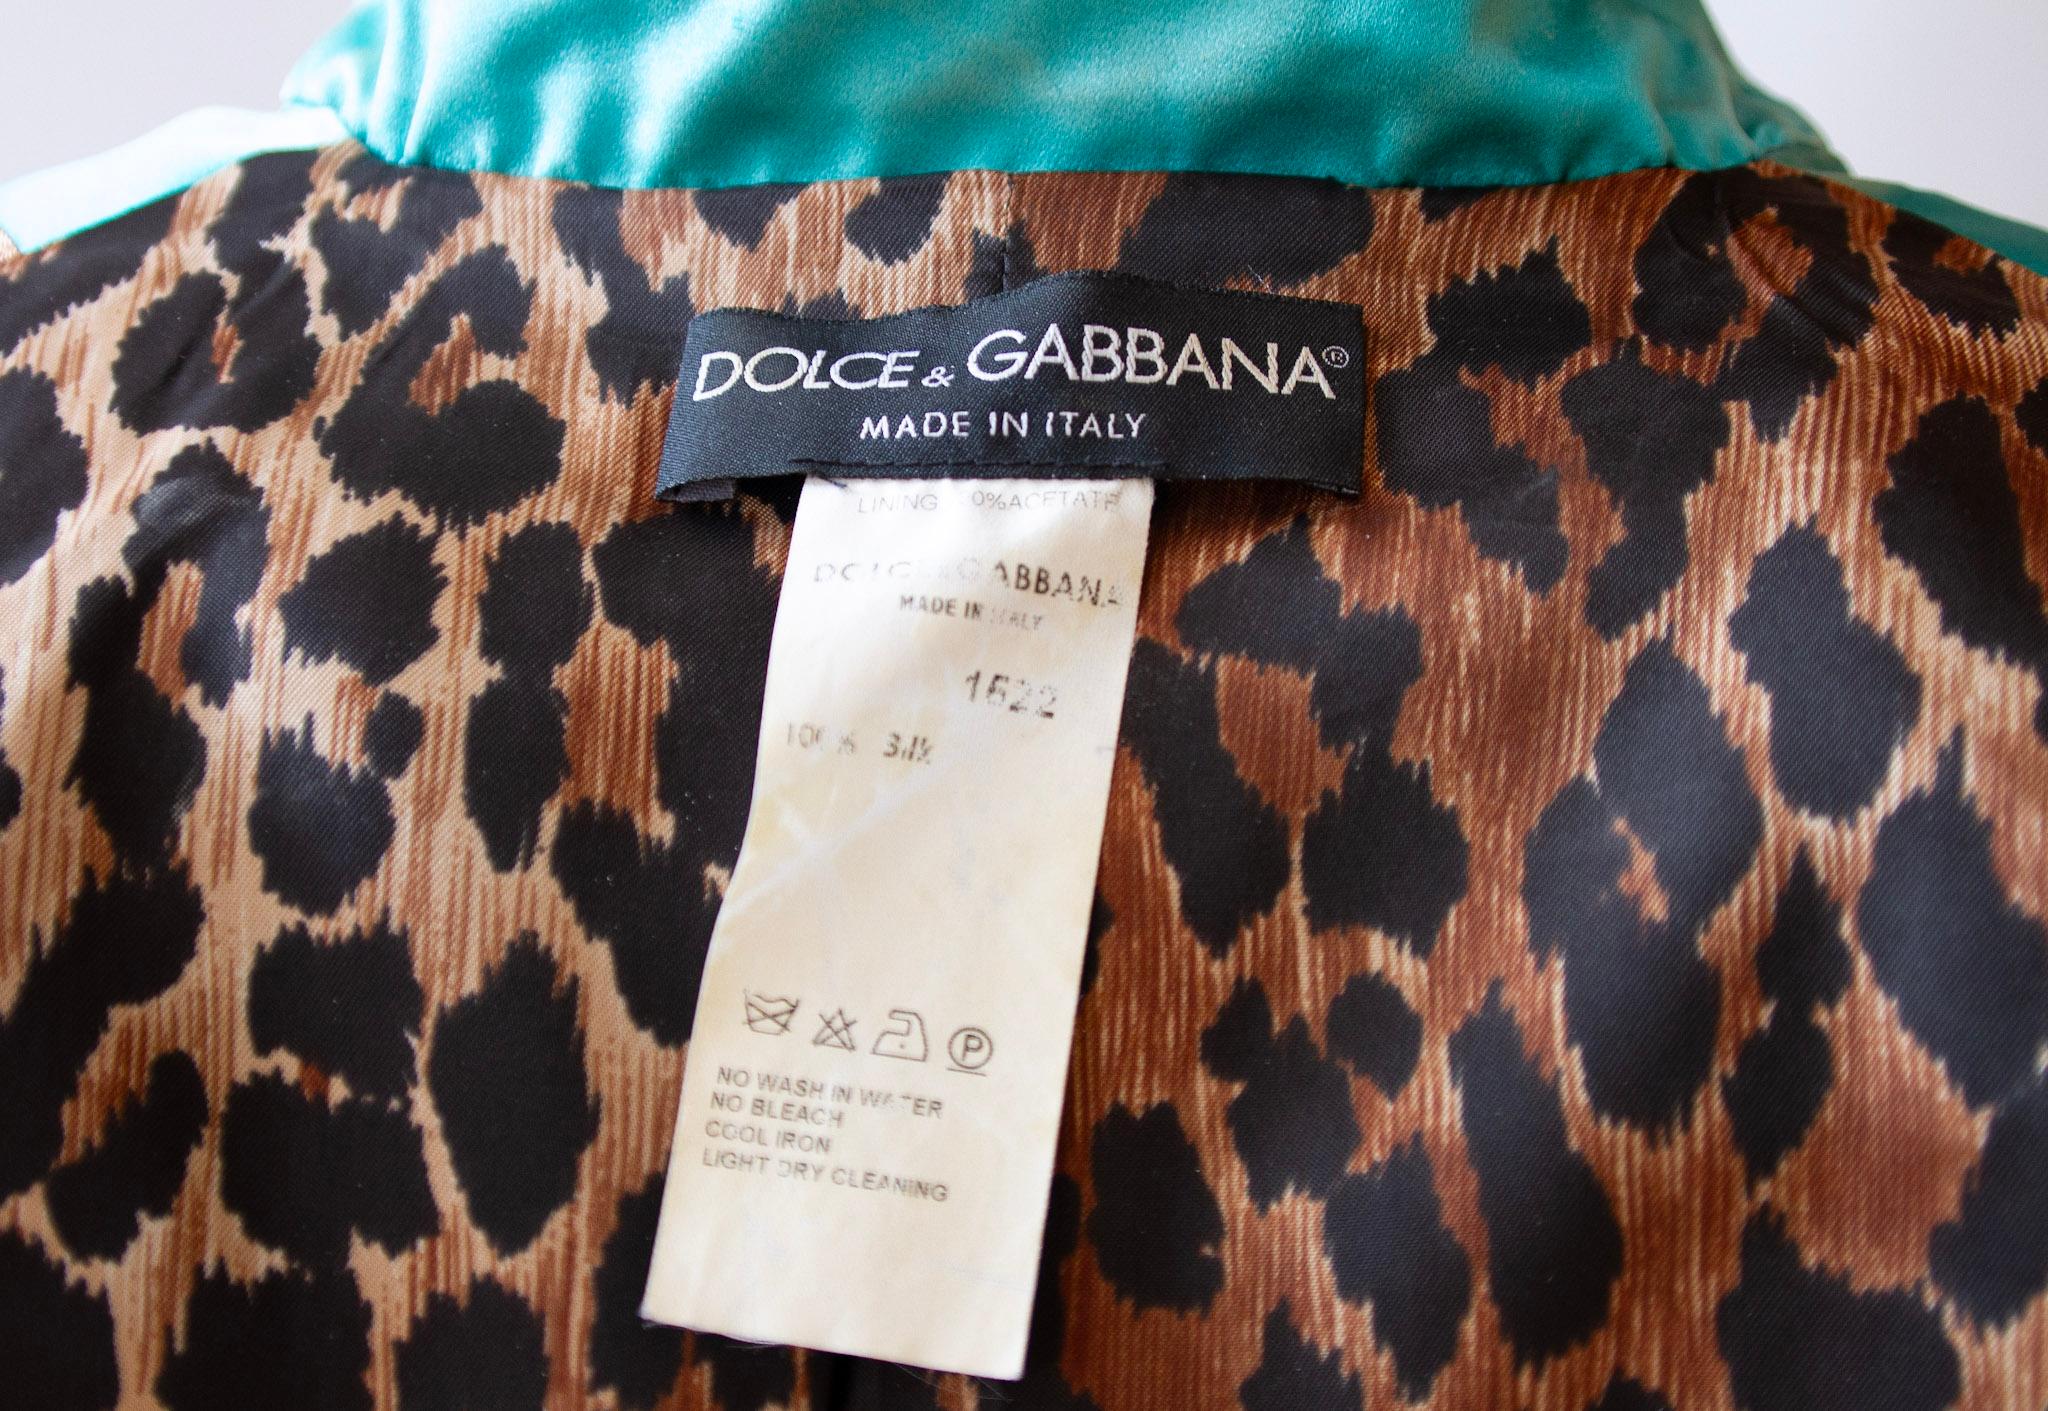 Dolce & Gabbana, Two Piece 100% Silk Turquoise Skirt Suit Ensemble  For Sale 5